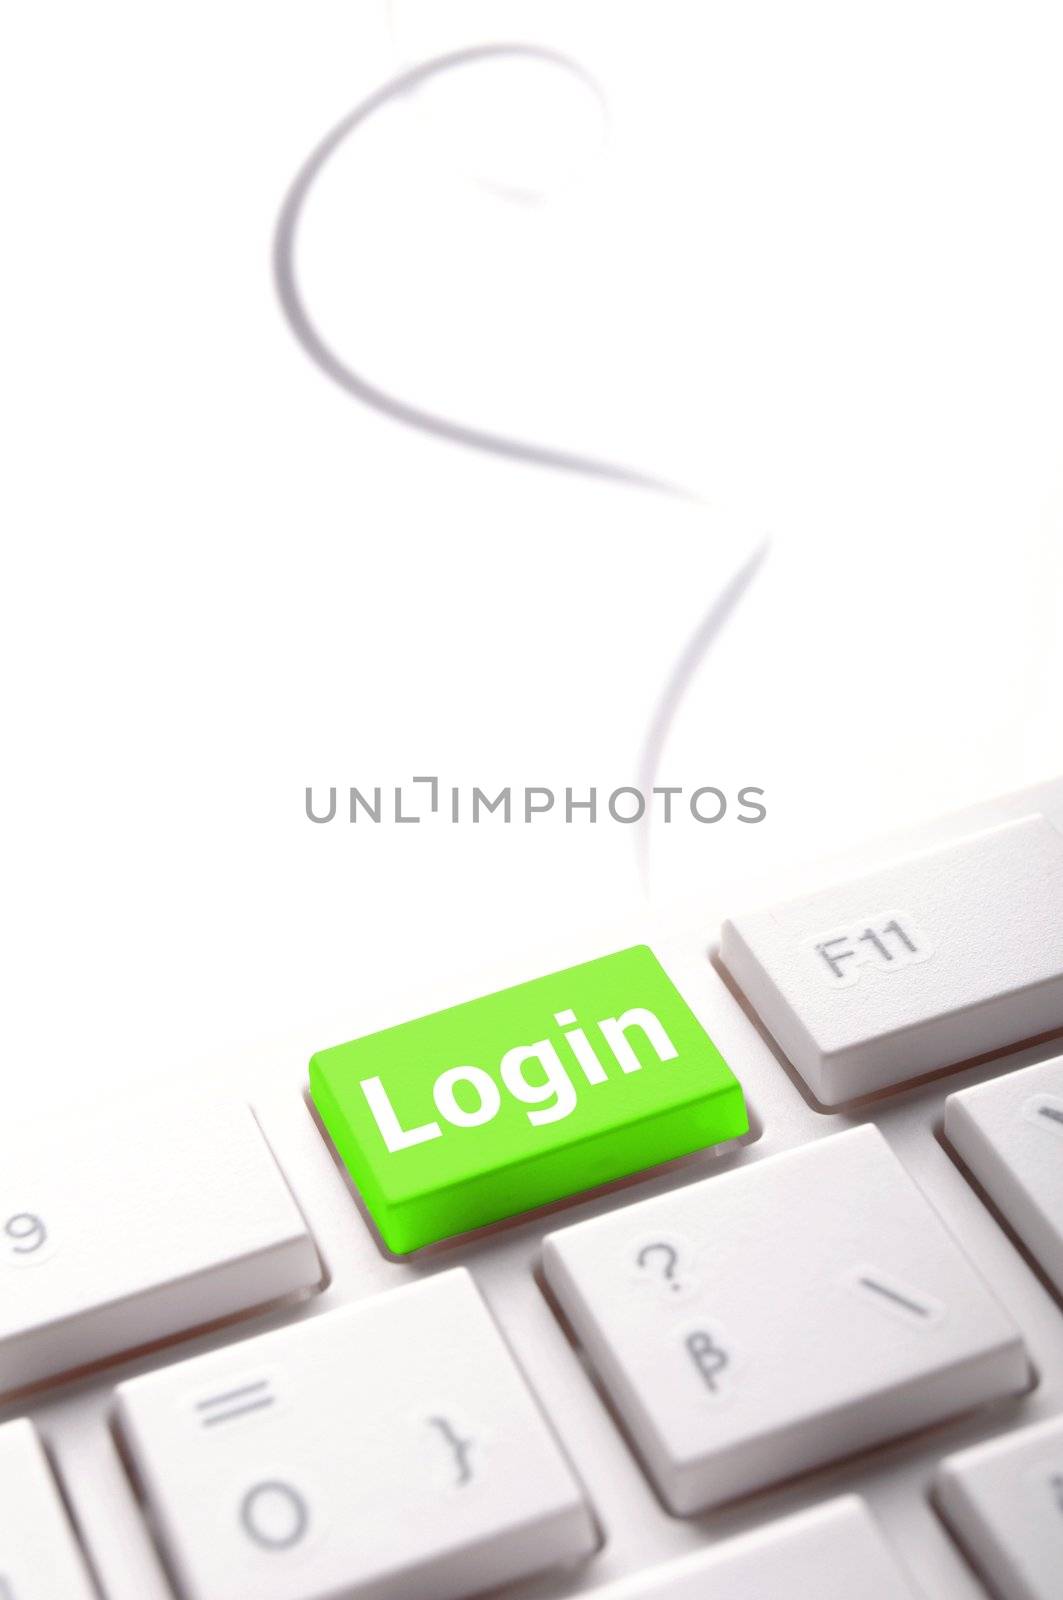 sign in or login concept with key on computer keyboard